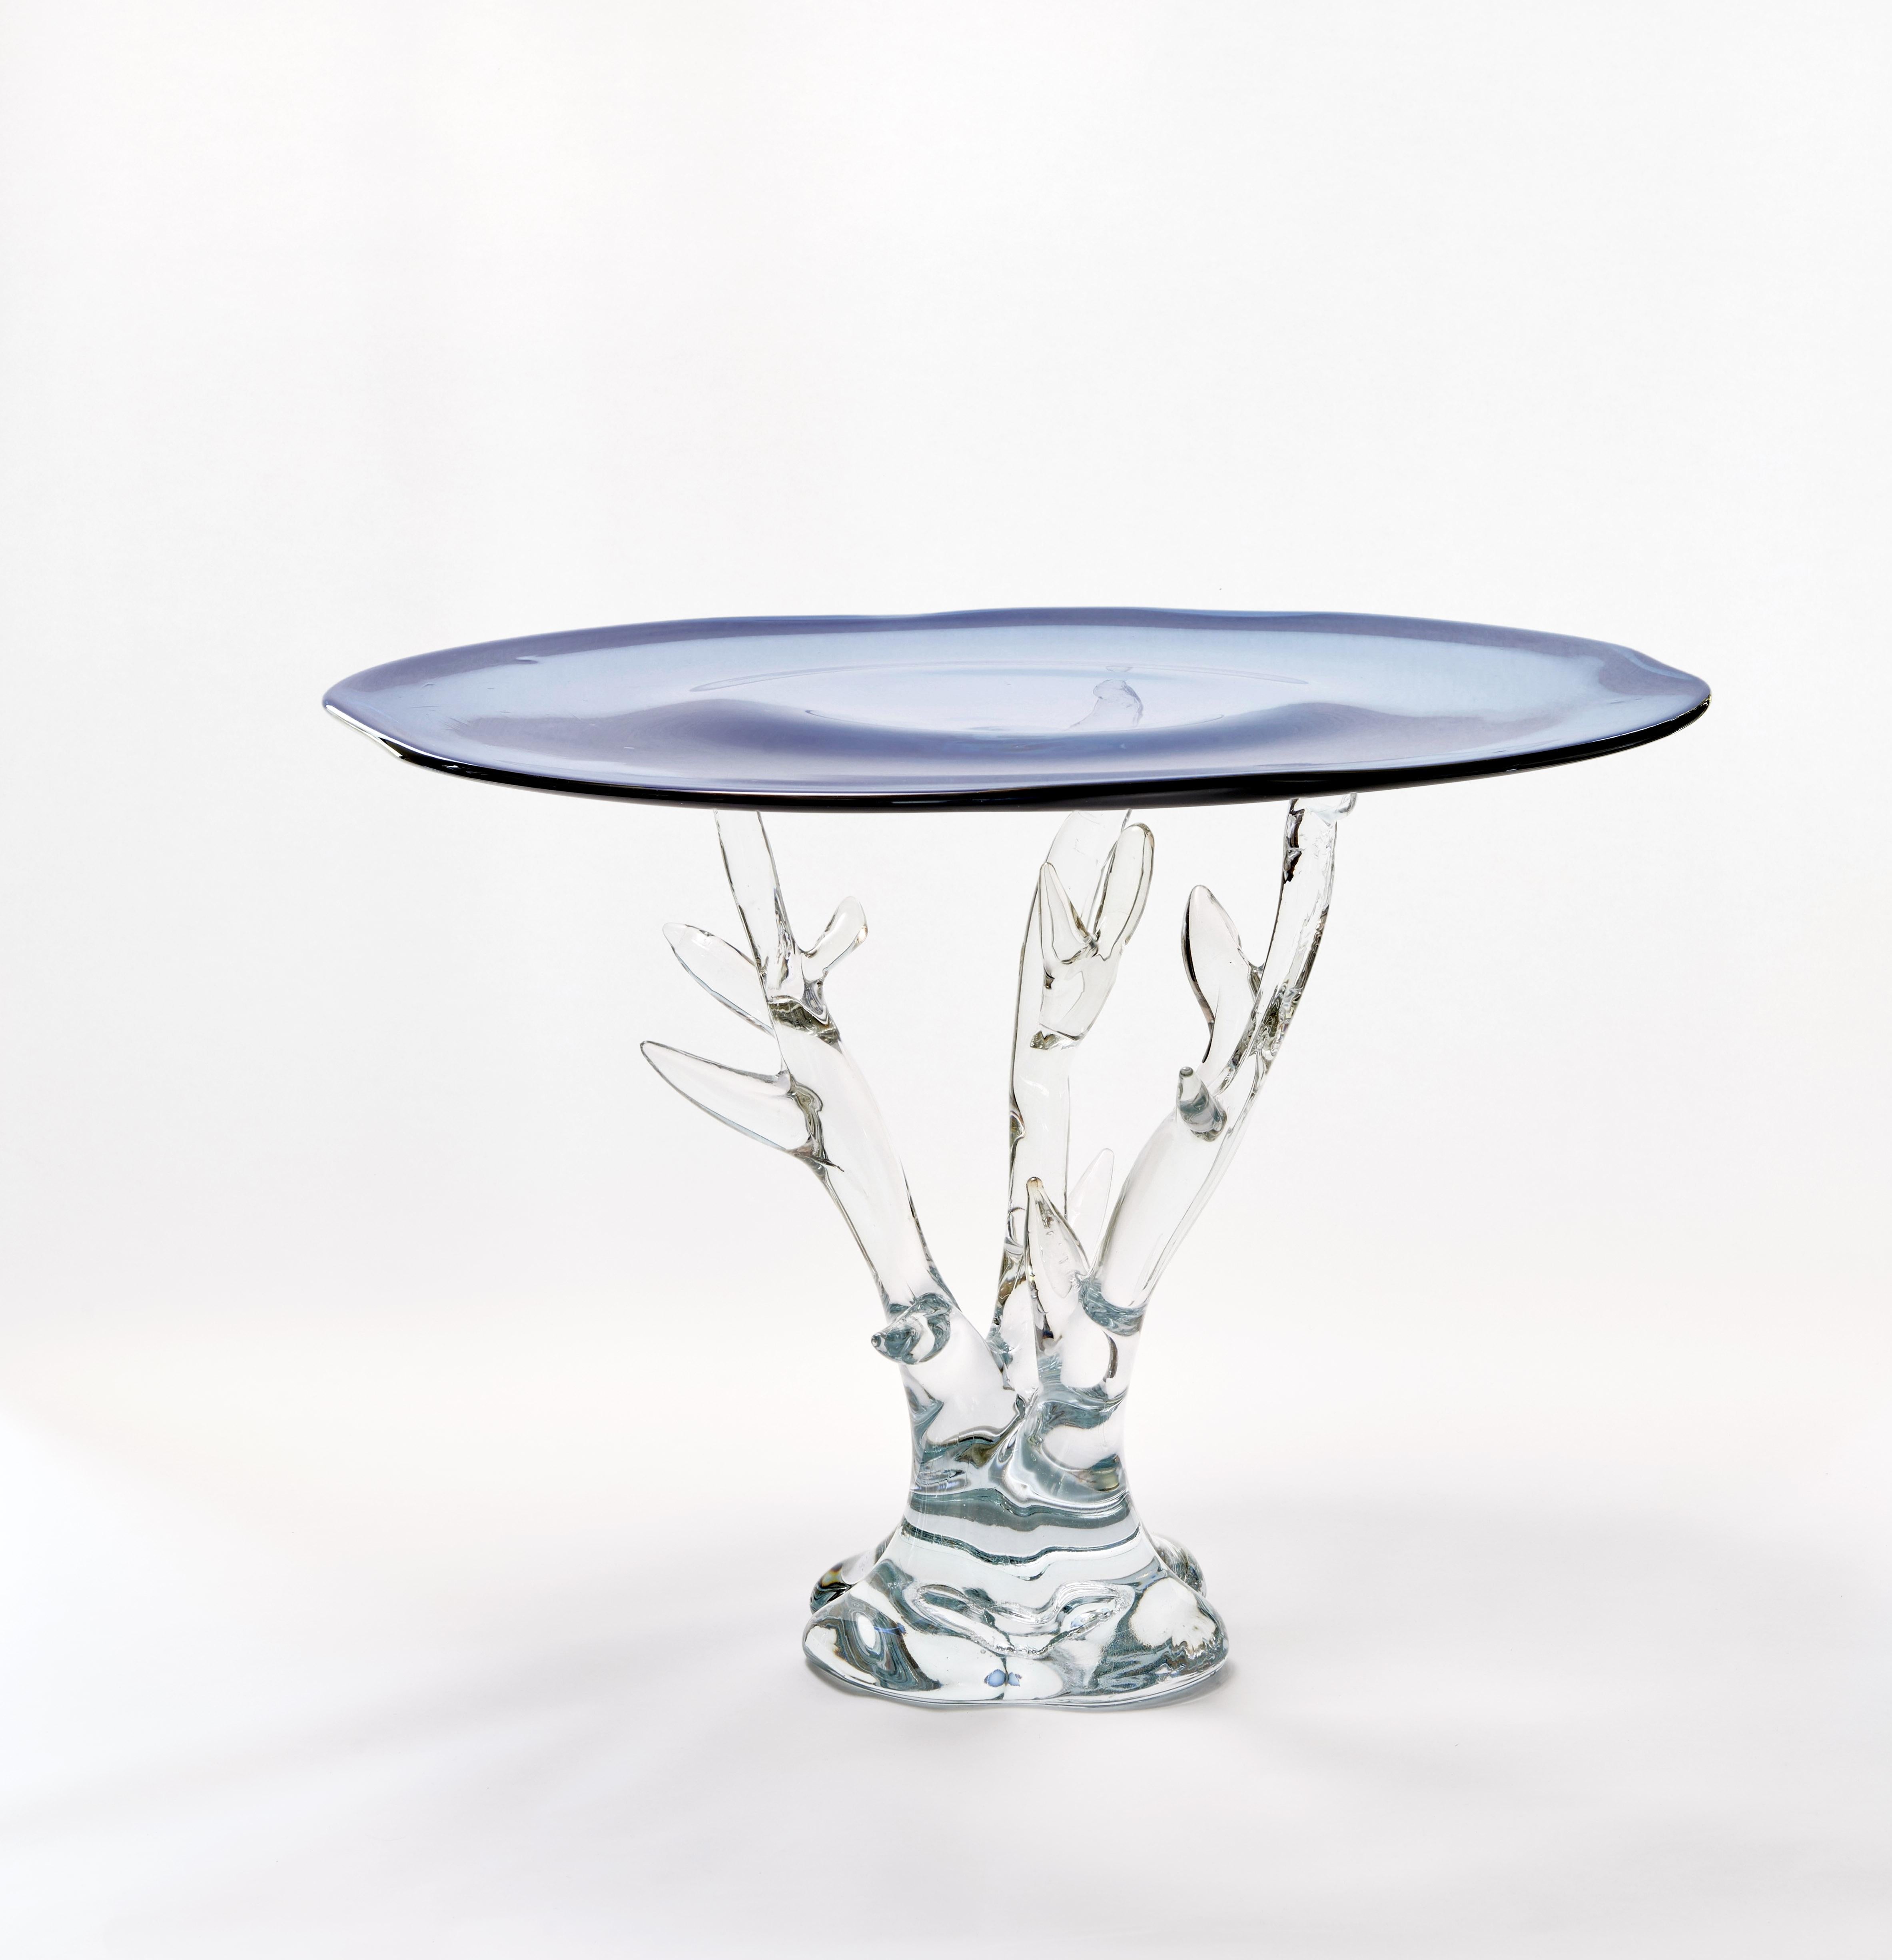 Dryade Coffee Table by Emilie Lemardeley
Dimensions: Ø 58 x H 42 cm
Materials: Hand-blown glass.

Designed as jewellery for the interior, the Lemardeley’s creations reflect French craftsmanship infused with elegance and refinement. Based in France,